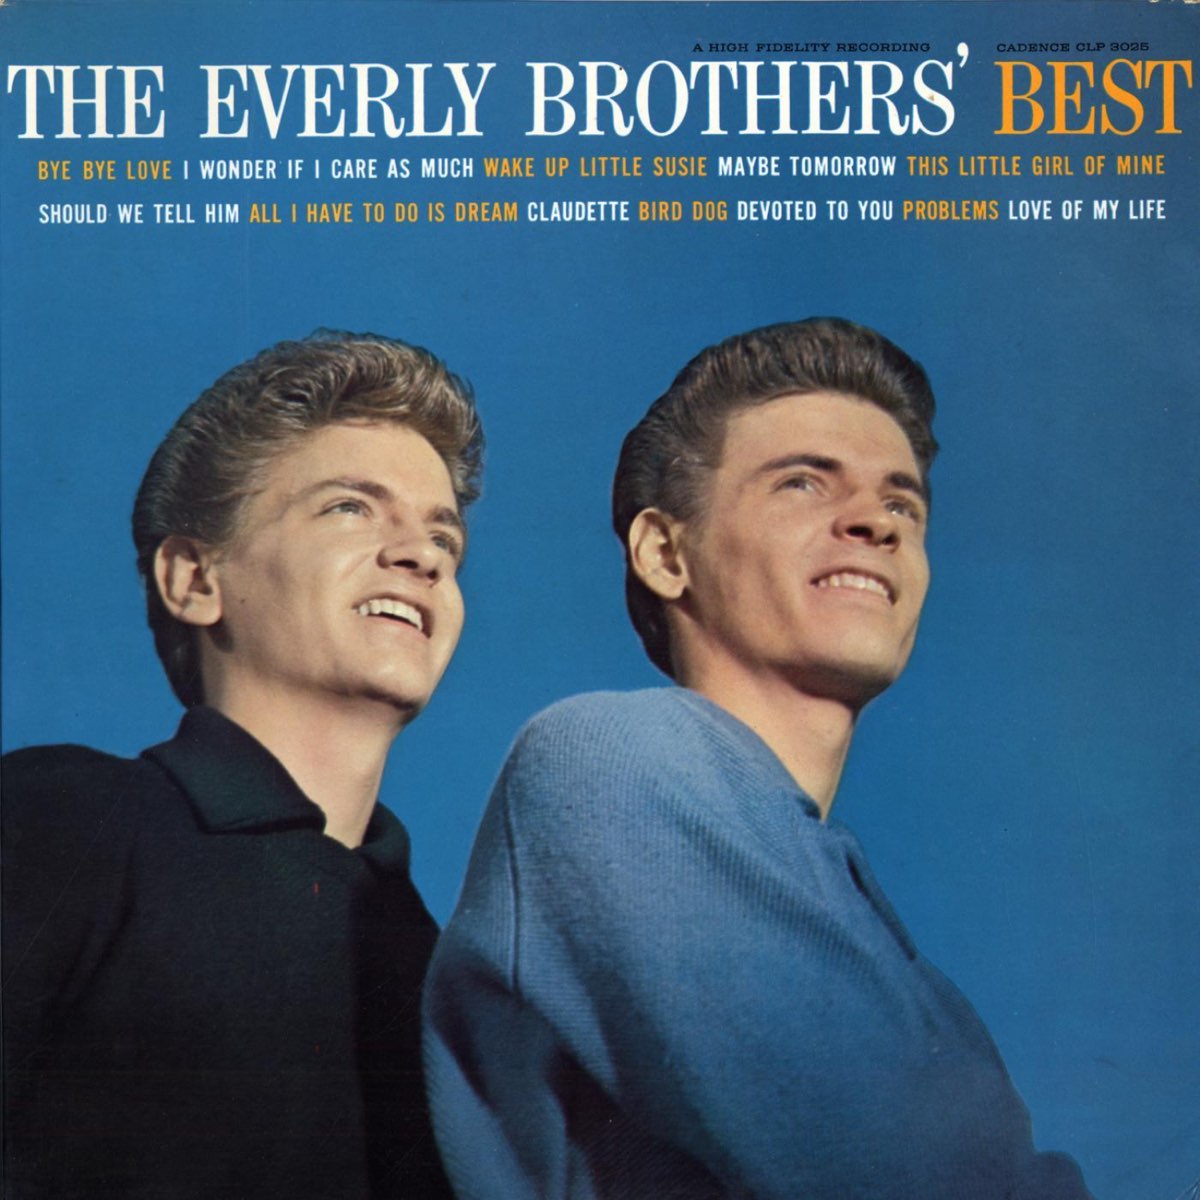 The Everly Brothers' Best by The Everly Brothers on Apple Music